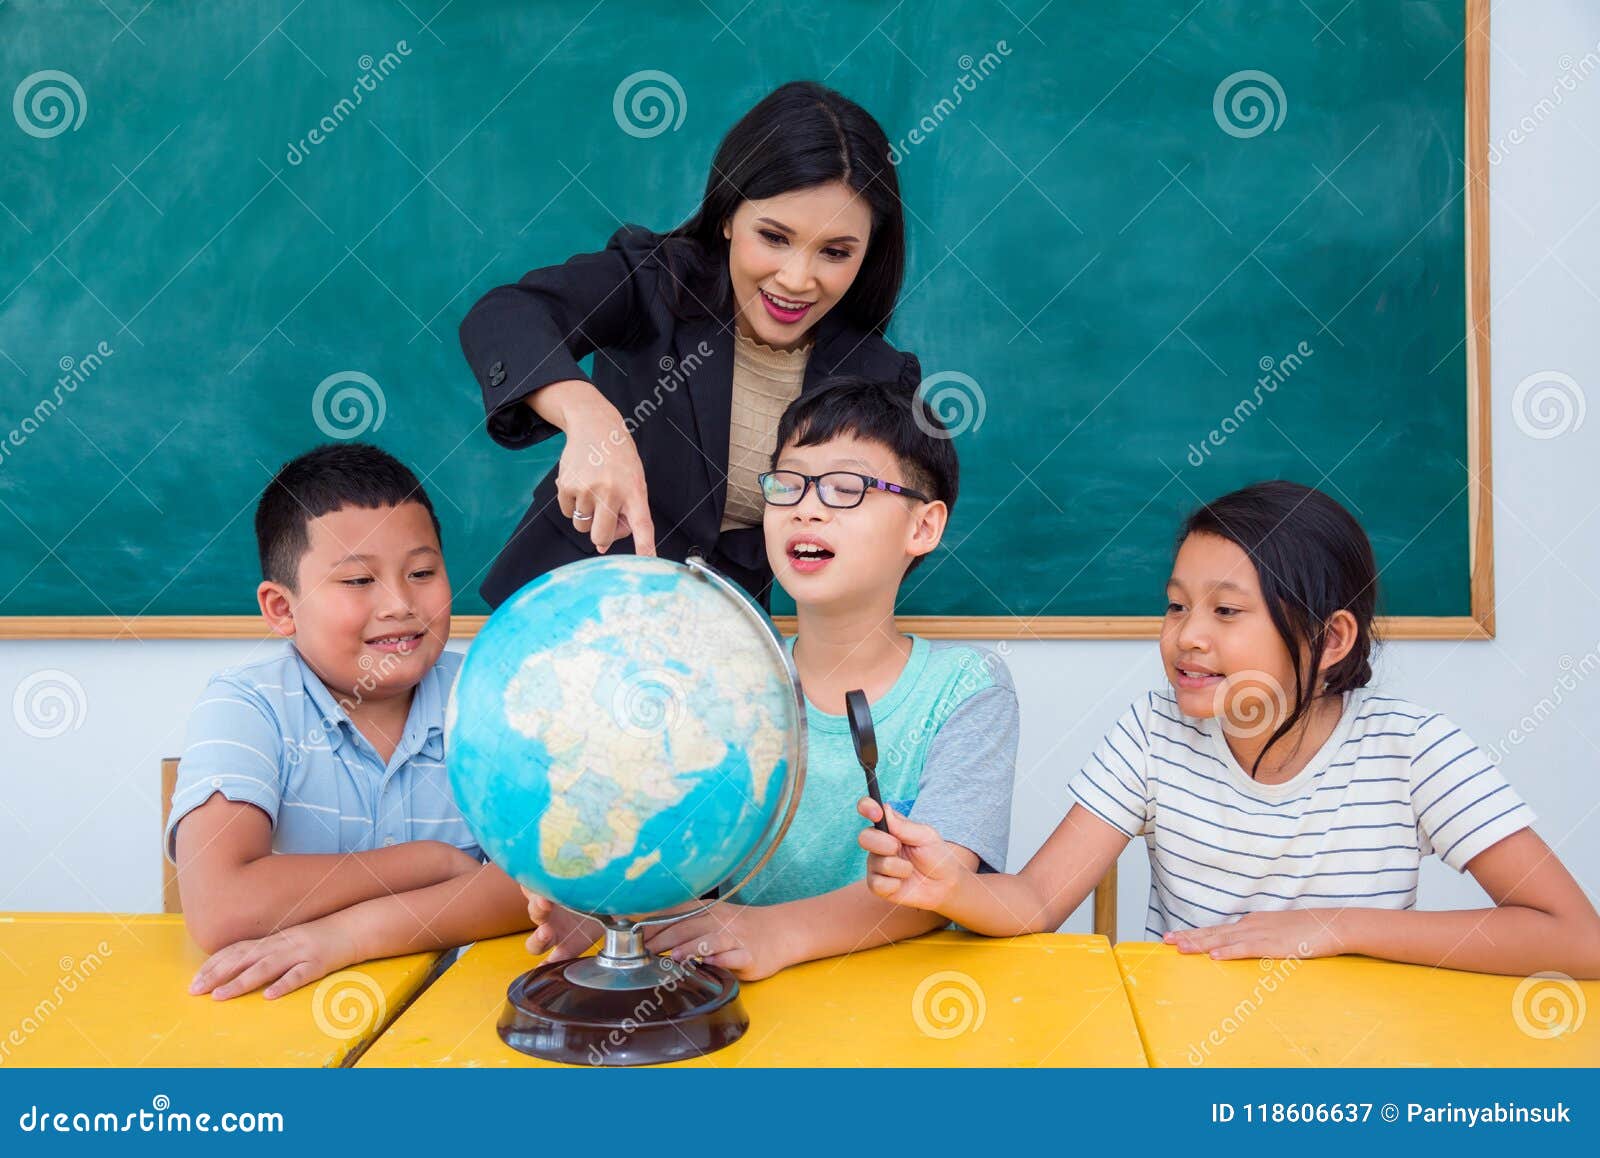 teacher and students studying geography in class